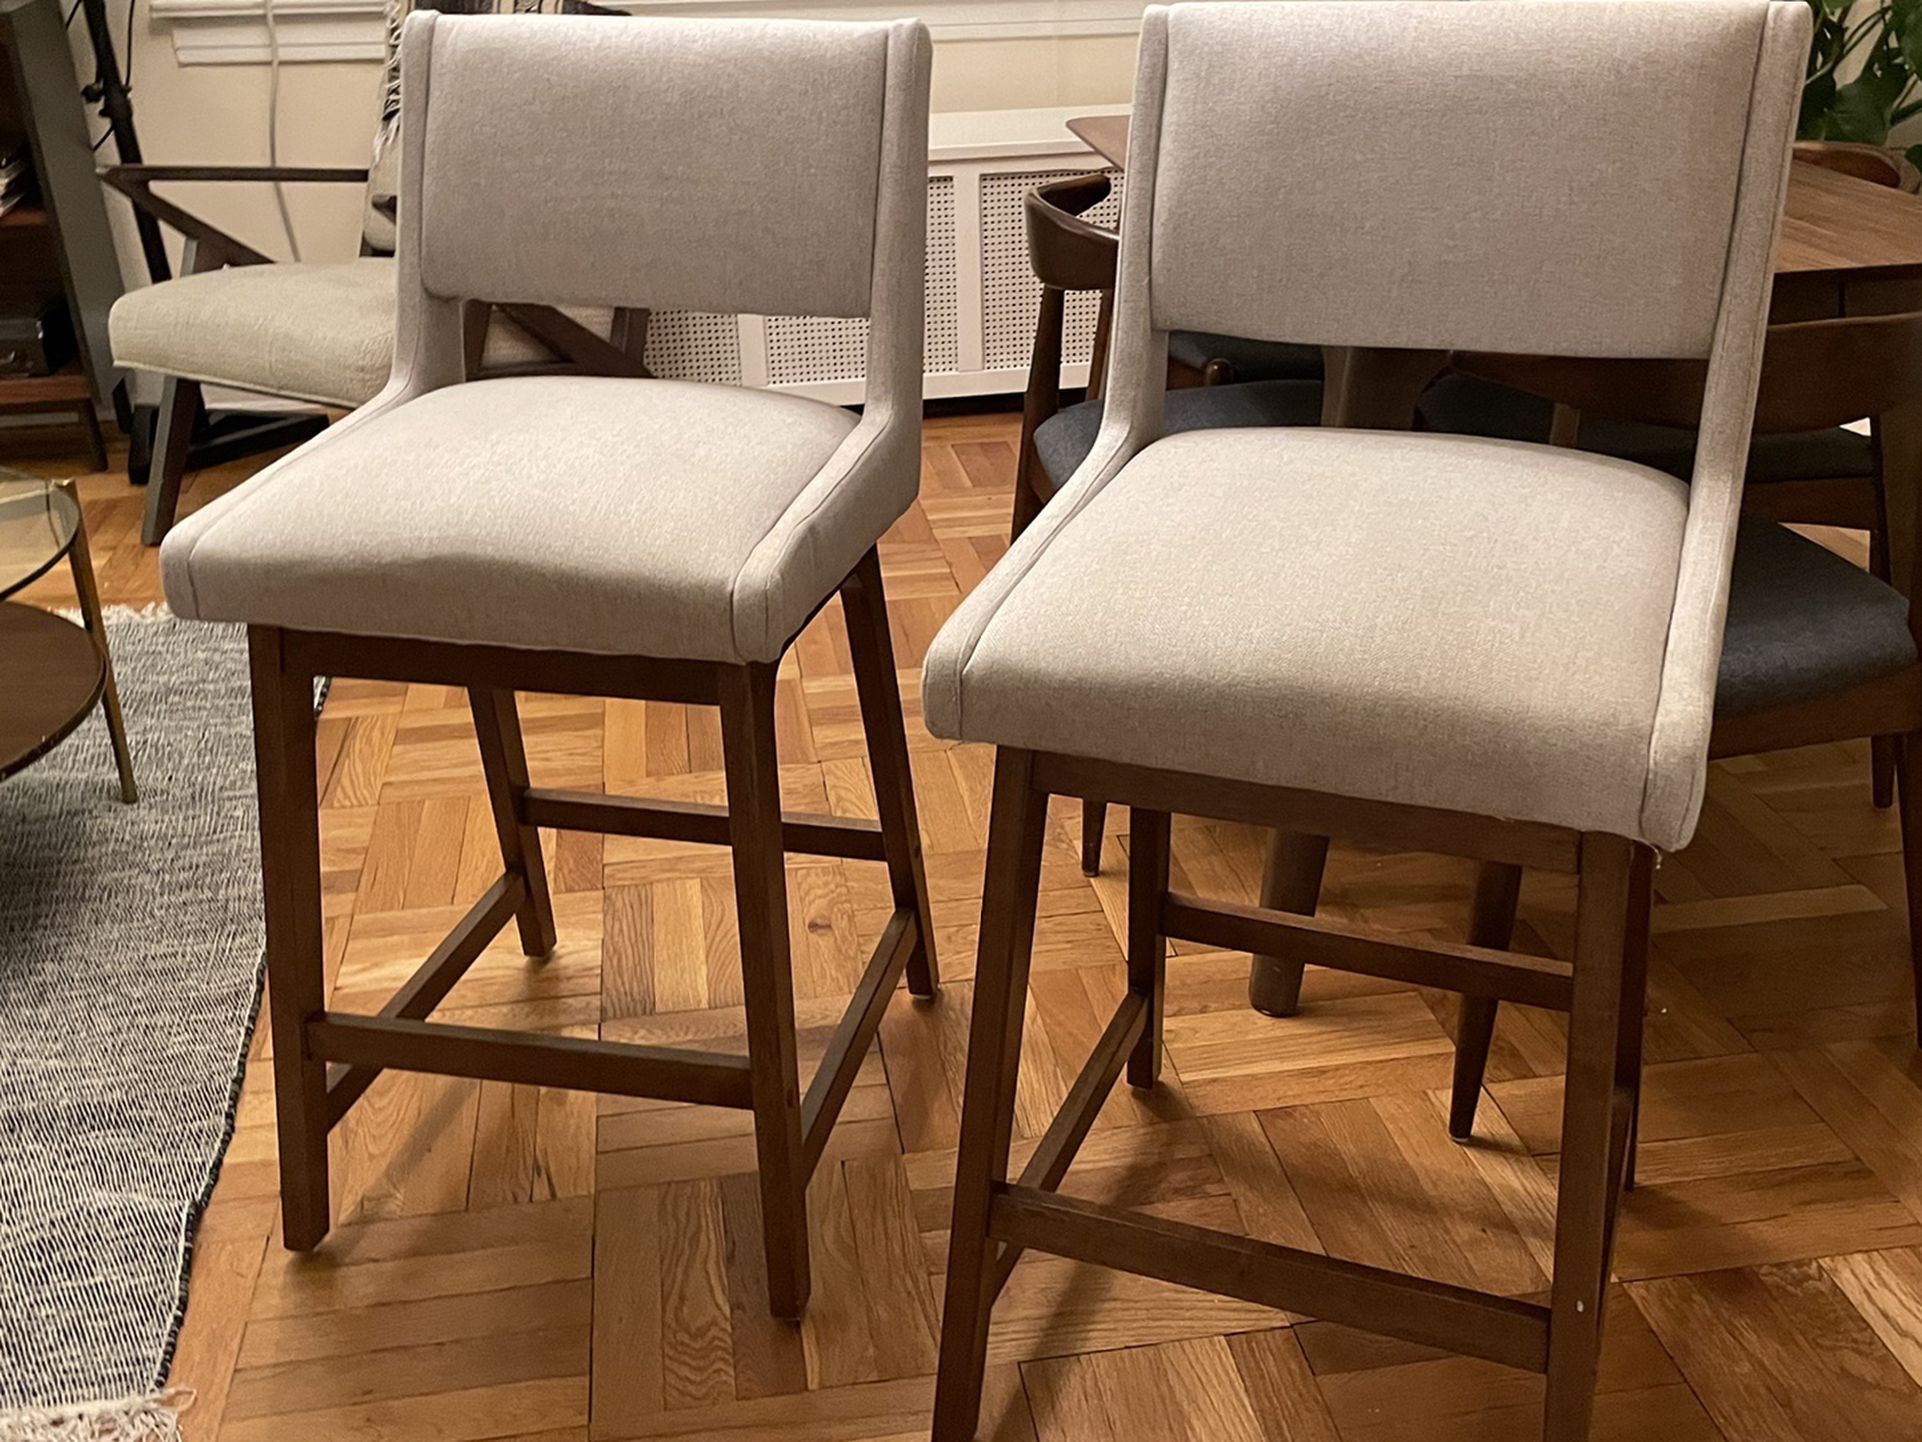 New Pair of Bar Stools/ Chairs